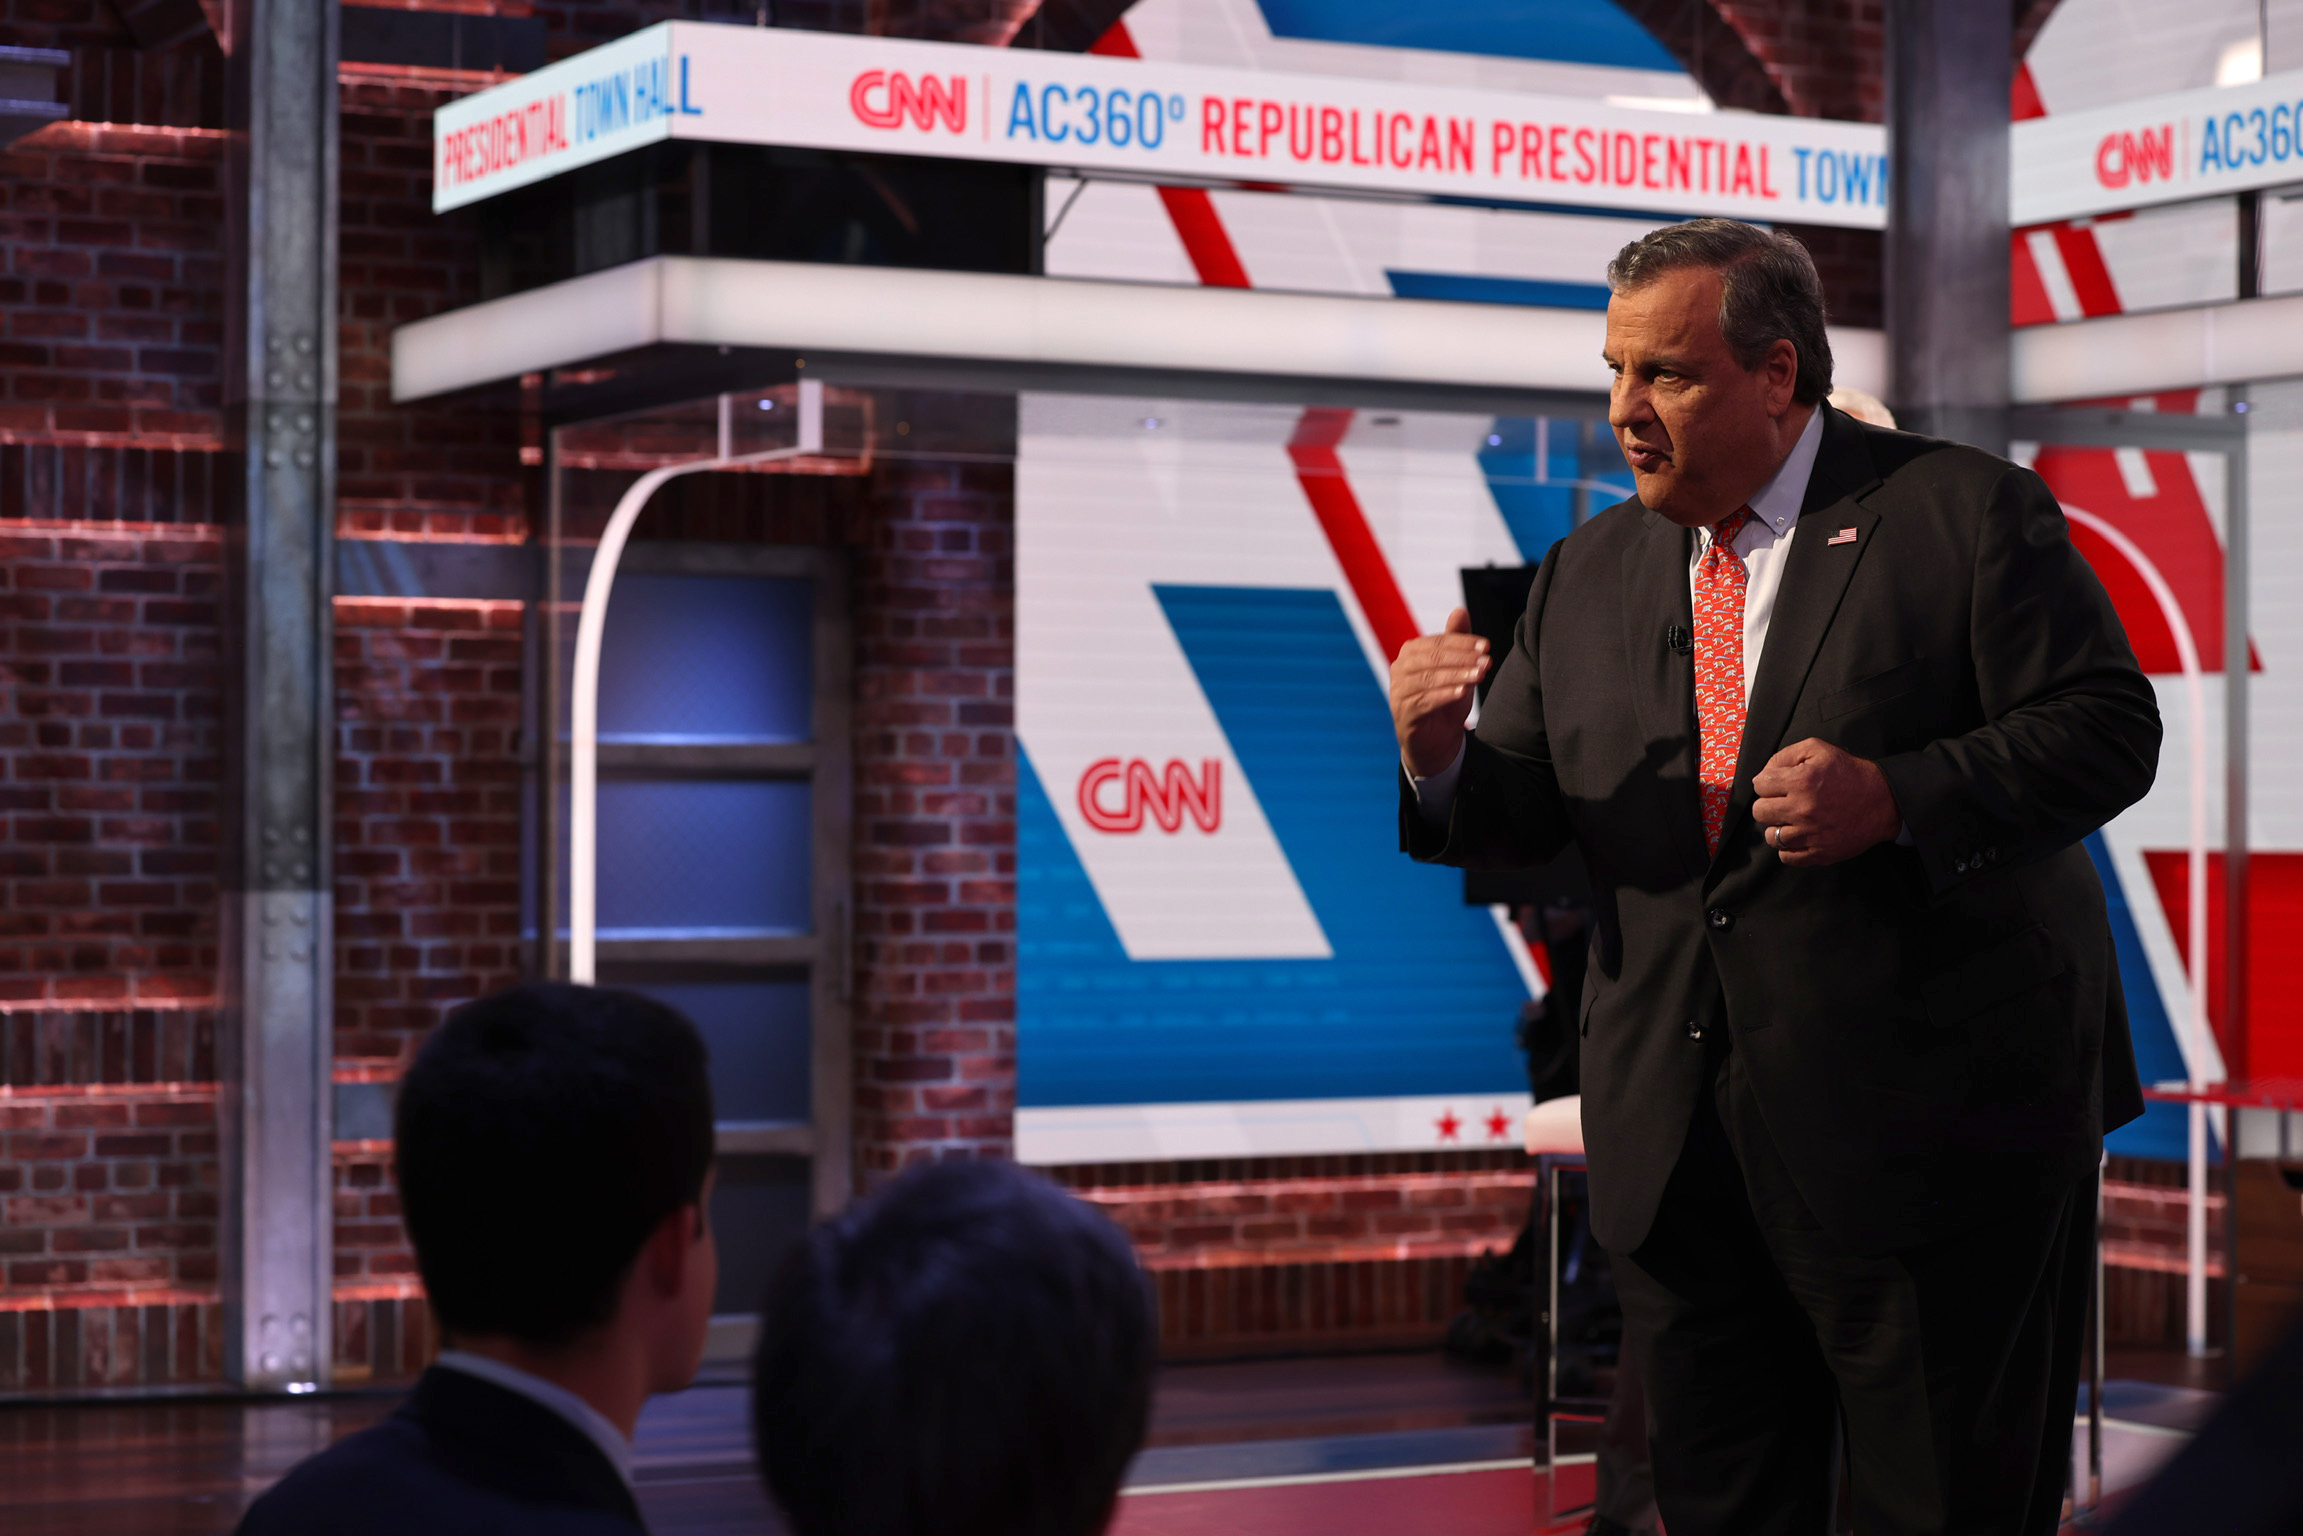 Chris Christie speaks at a CNN Republican Presidential Town Hall moderated by CNN’s Anderson Cooper in New York on Monday, June 12.